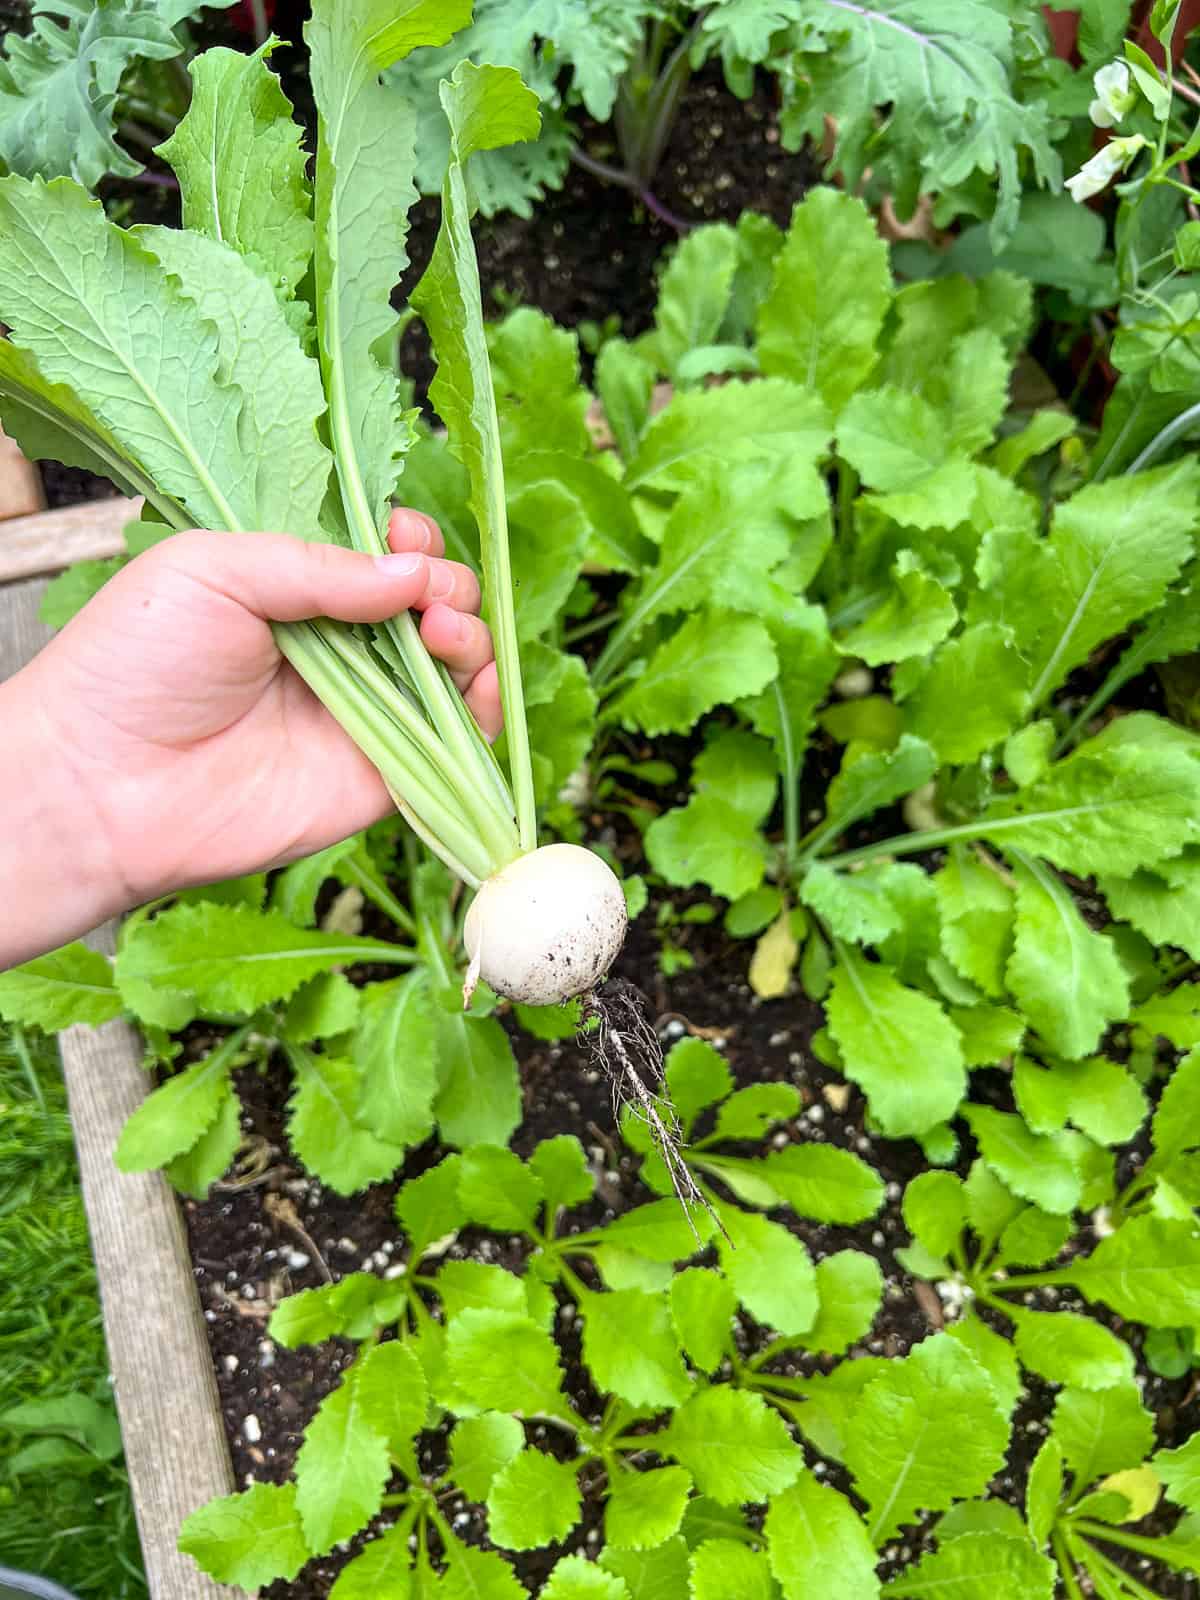 A white salad radish being pulled directly out of a raised bed Square Foot Garden.